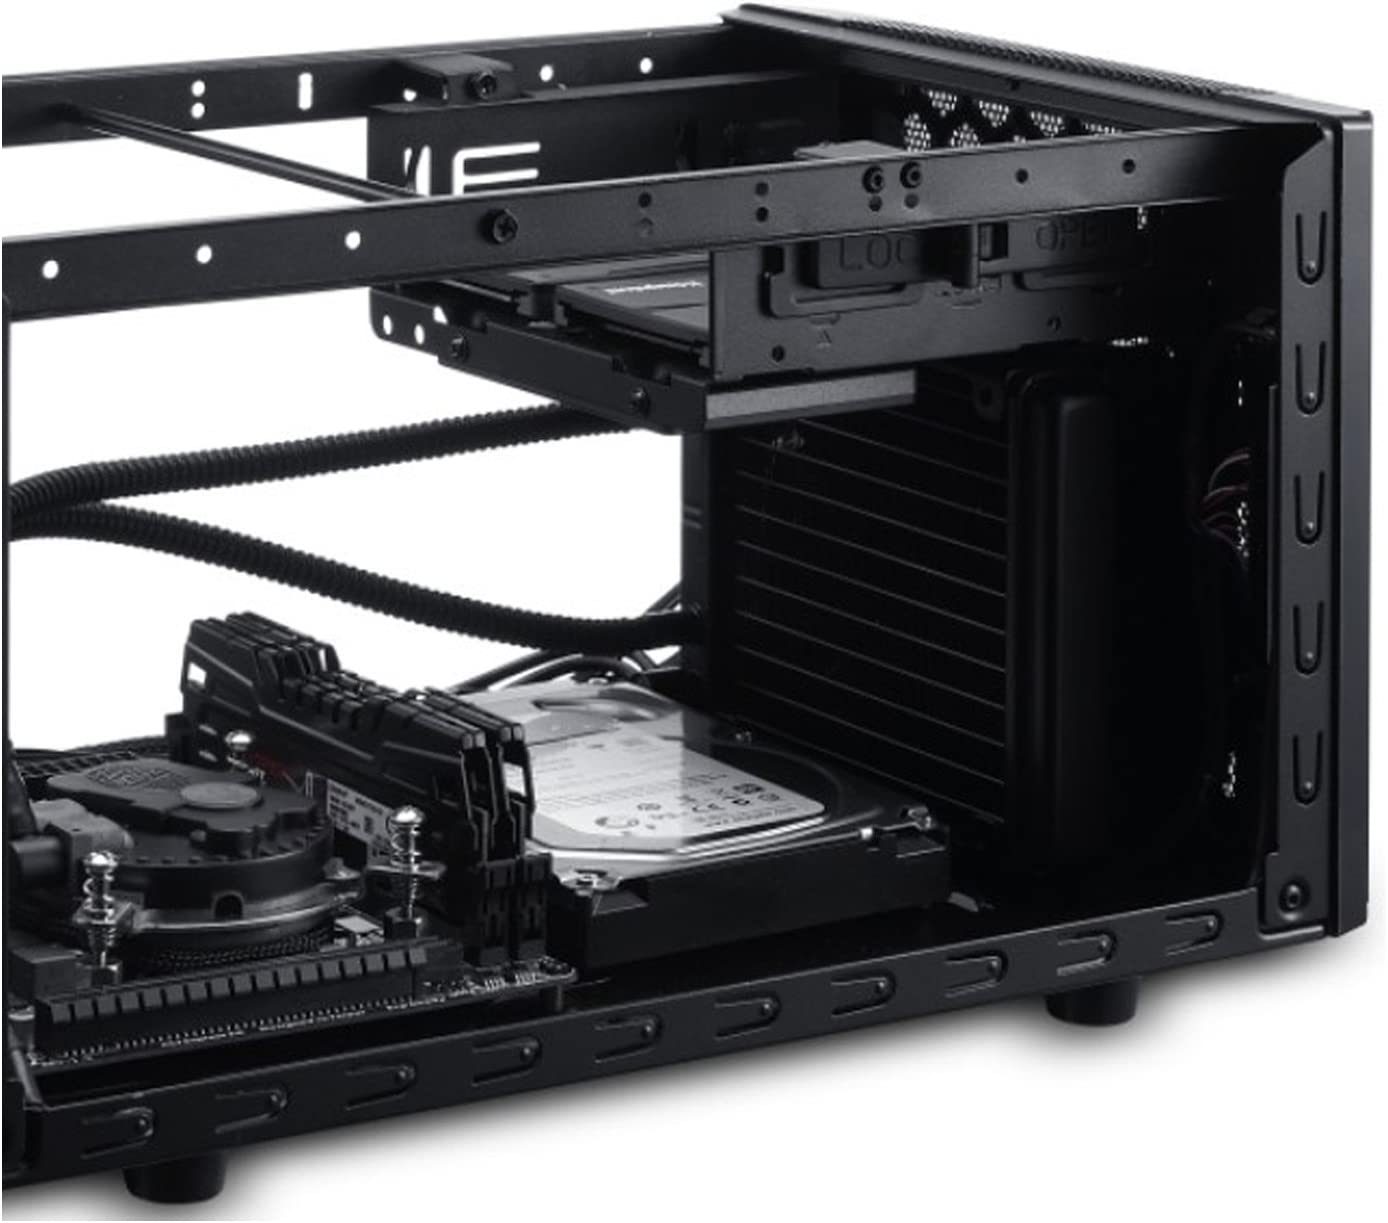 Cooler Master RC-130-KKN1 Elite 130 - Mini-ITX Computer Case with Mesh Front Panel and Water Cooling Support - Geek Tech